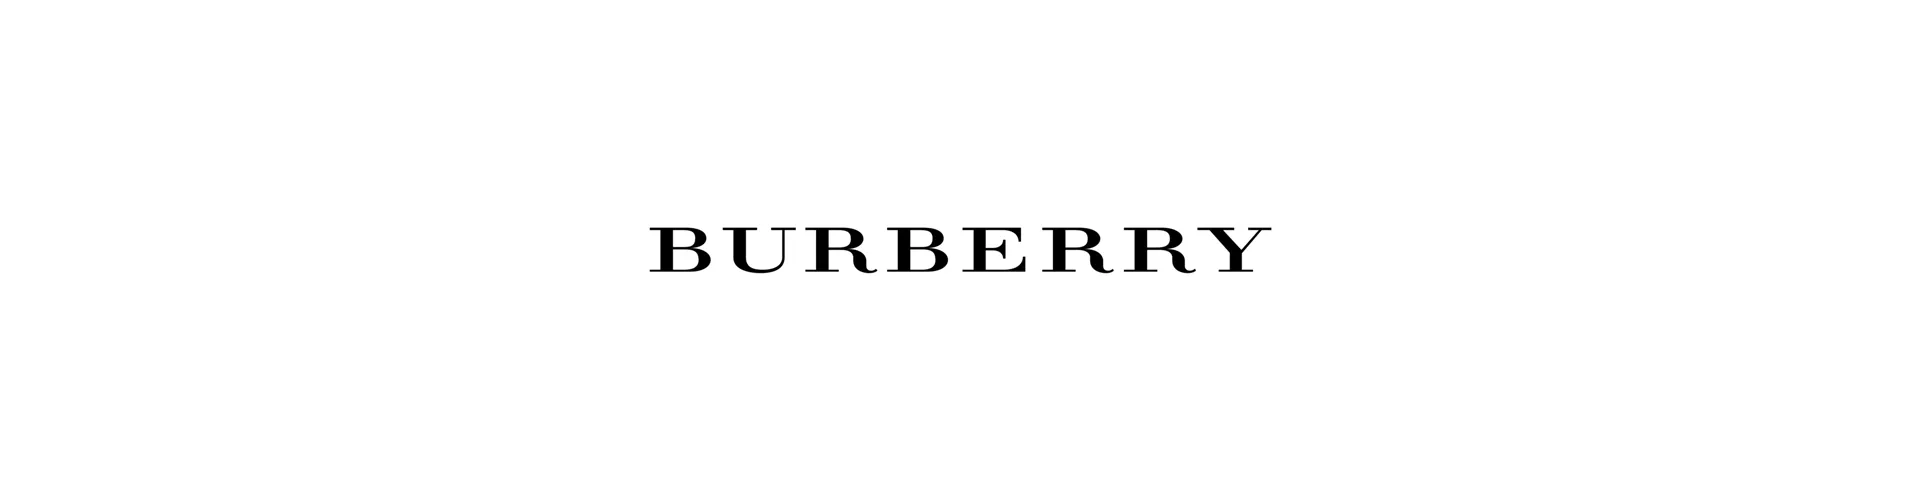 Burberry Aftershave for Men | Great Offers on Perfume